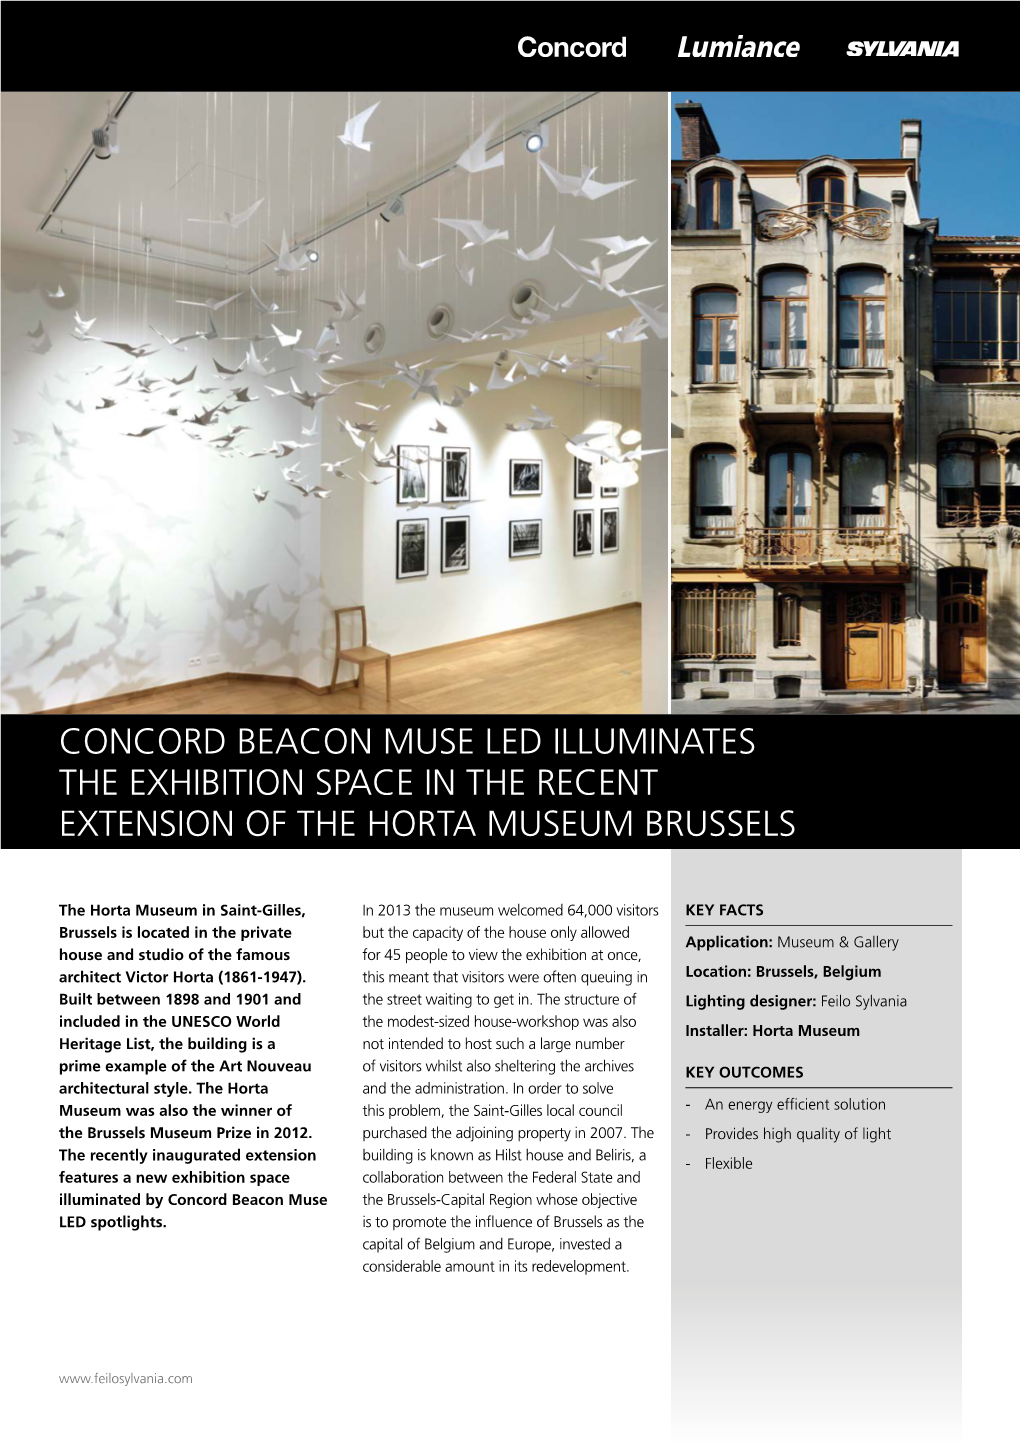 Concord Beacon Muse Led Illuminates the Exhibition Space in the Recent Extension of the Horta Museum Brussels